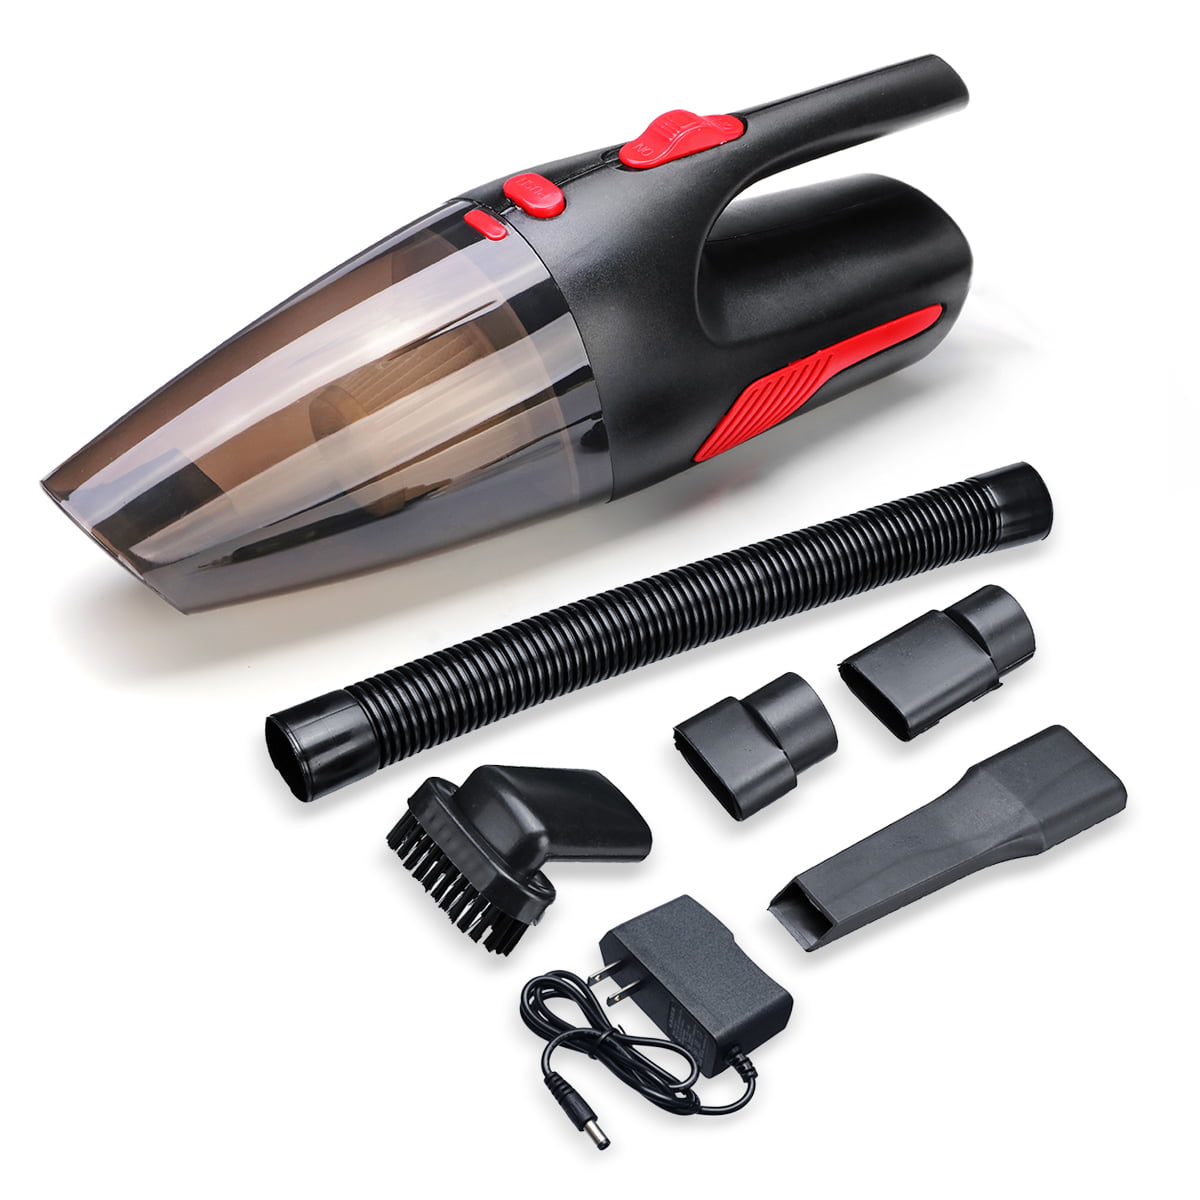 MINI HANDHELD PORTABLE CAR VACUUM CLEANER HOOVER WET DRY POWERFUL RECHARGEABLE 